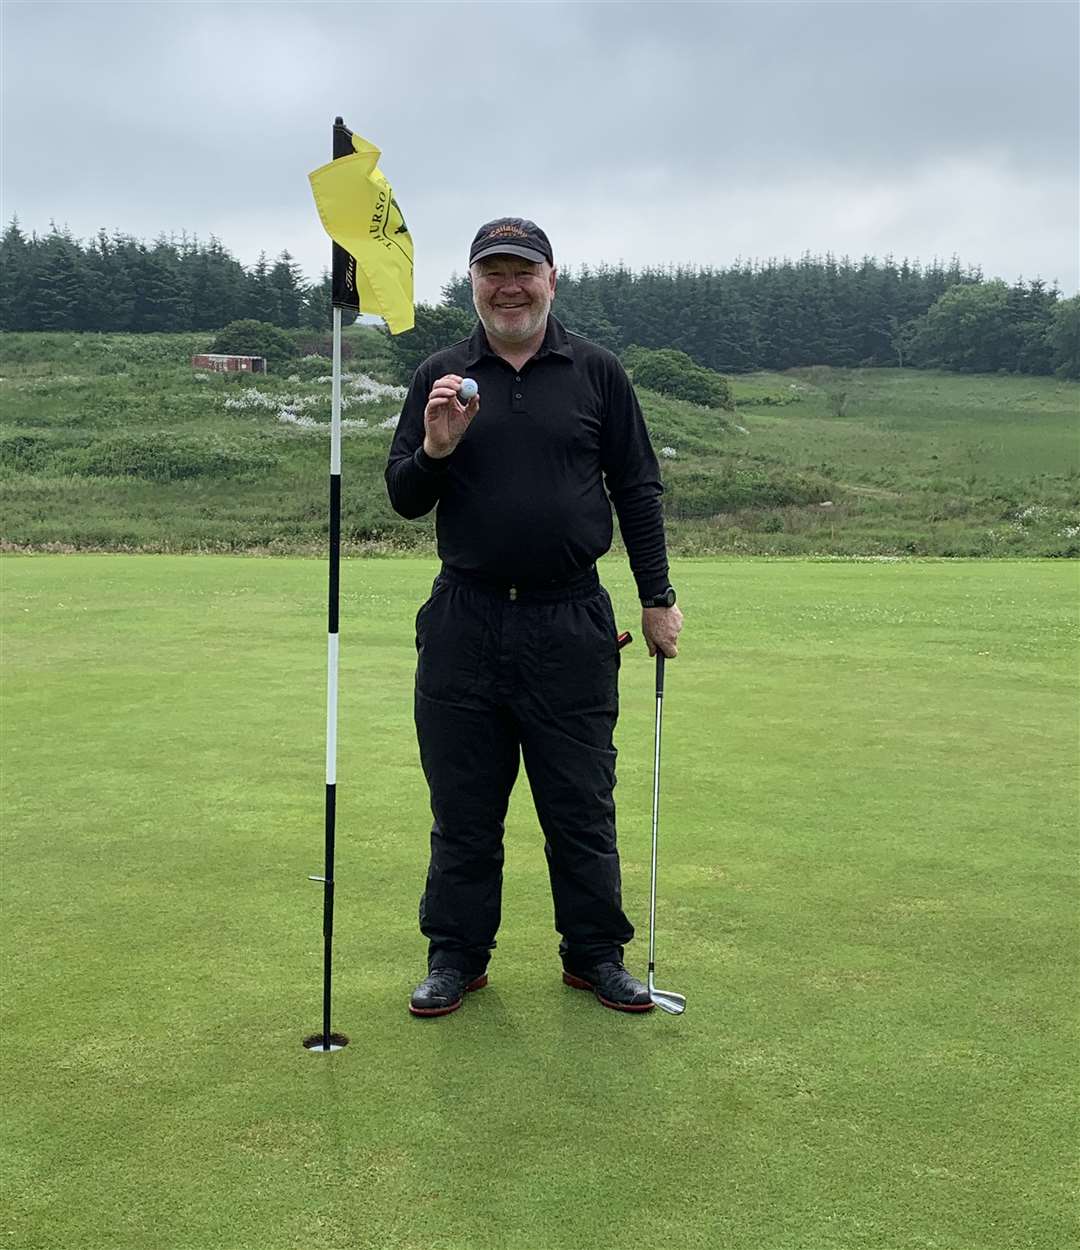 Stephen Williamson holed his six-iron tee shot at the 158-yard ninth hole during Saturday’s medal competition at Thurso.